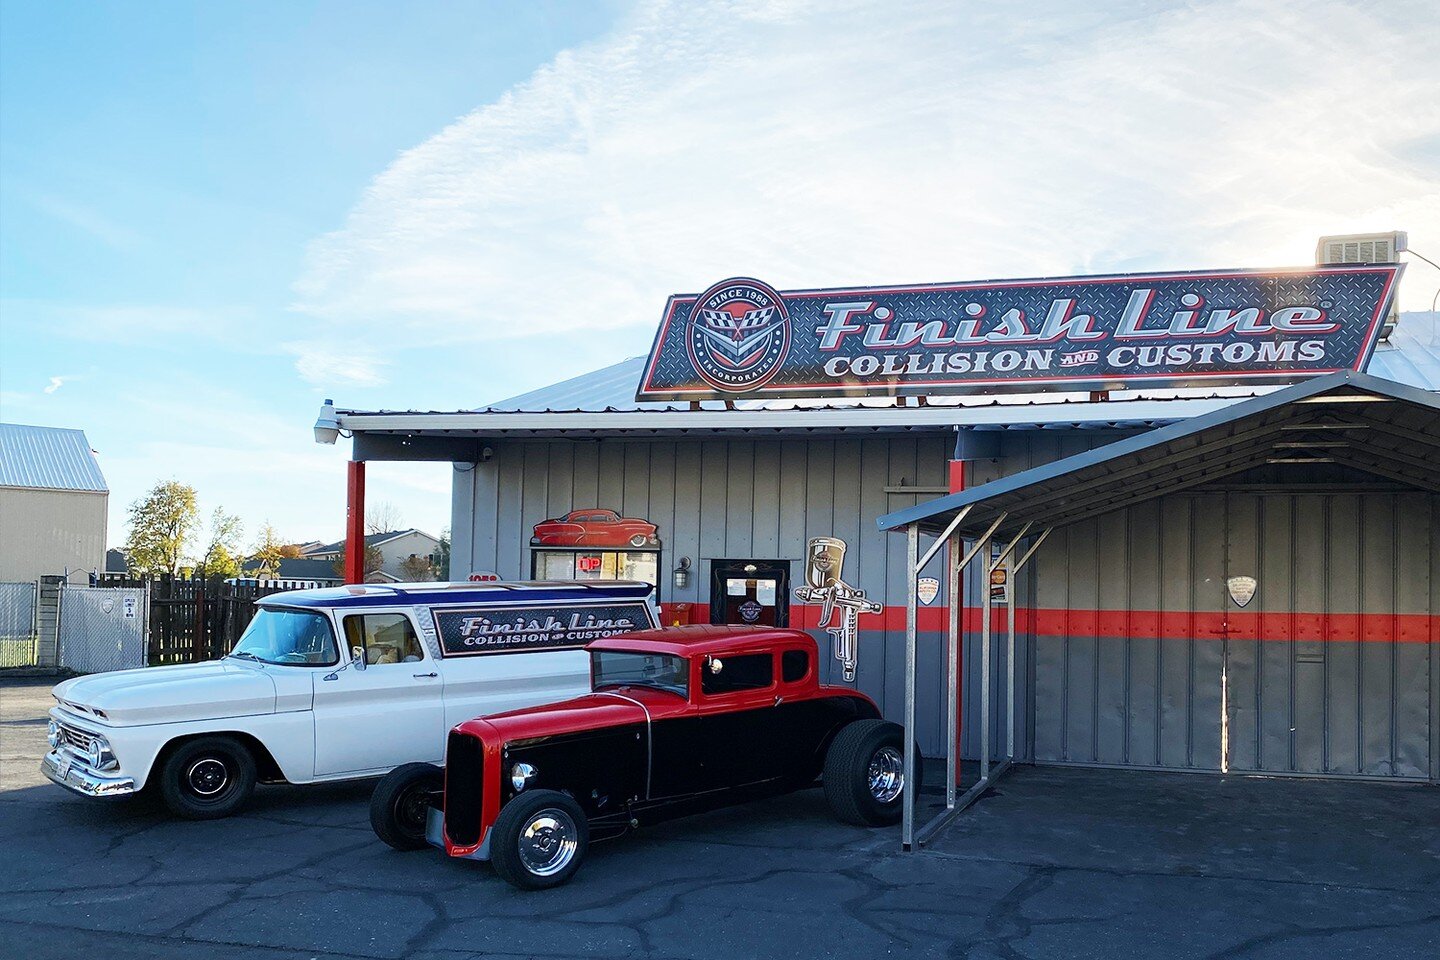 Finish Line Collision and Customs is a third generation, locally owned business specializing in; collision repair, custom body mods, motorcycle repair, and custom painting. 

Call for a free estimate!
(530) 223-2720